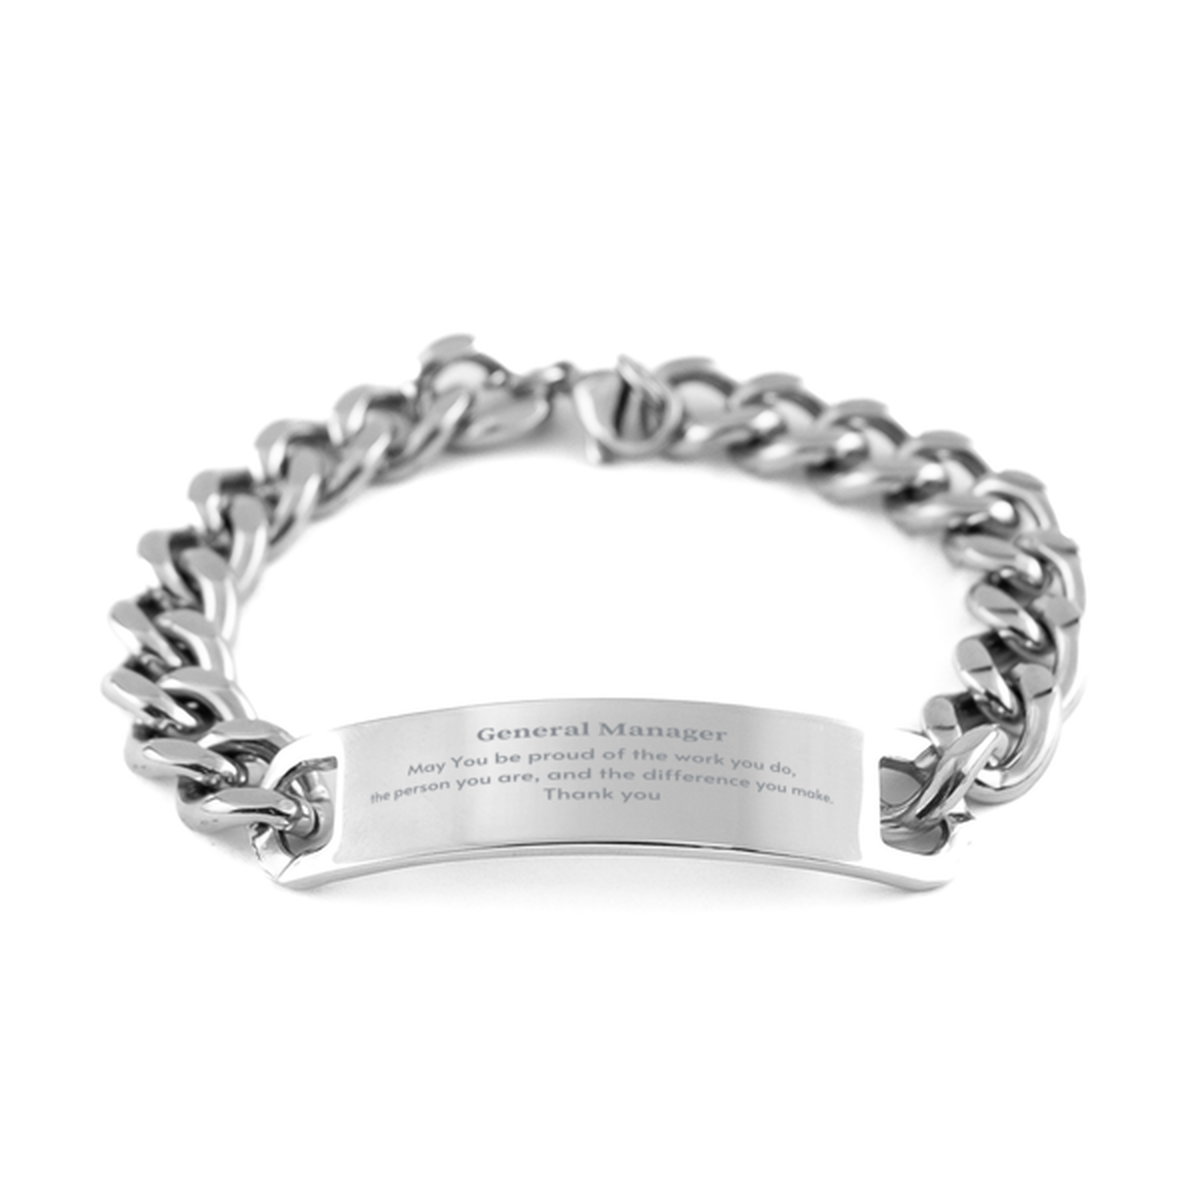 Heartwarming Cuban Chain Stainless Steel Bracelet Retirement Coworkers Gifts for General Manager, General Manager May You be proud of the work you do, the person you are Gifts for Boss Men Women Friends